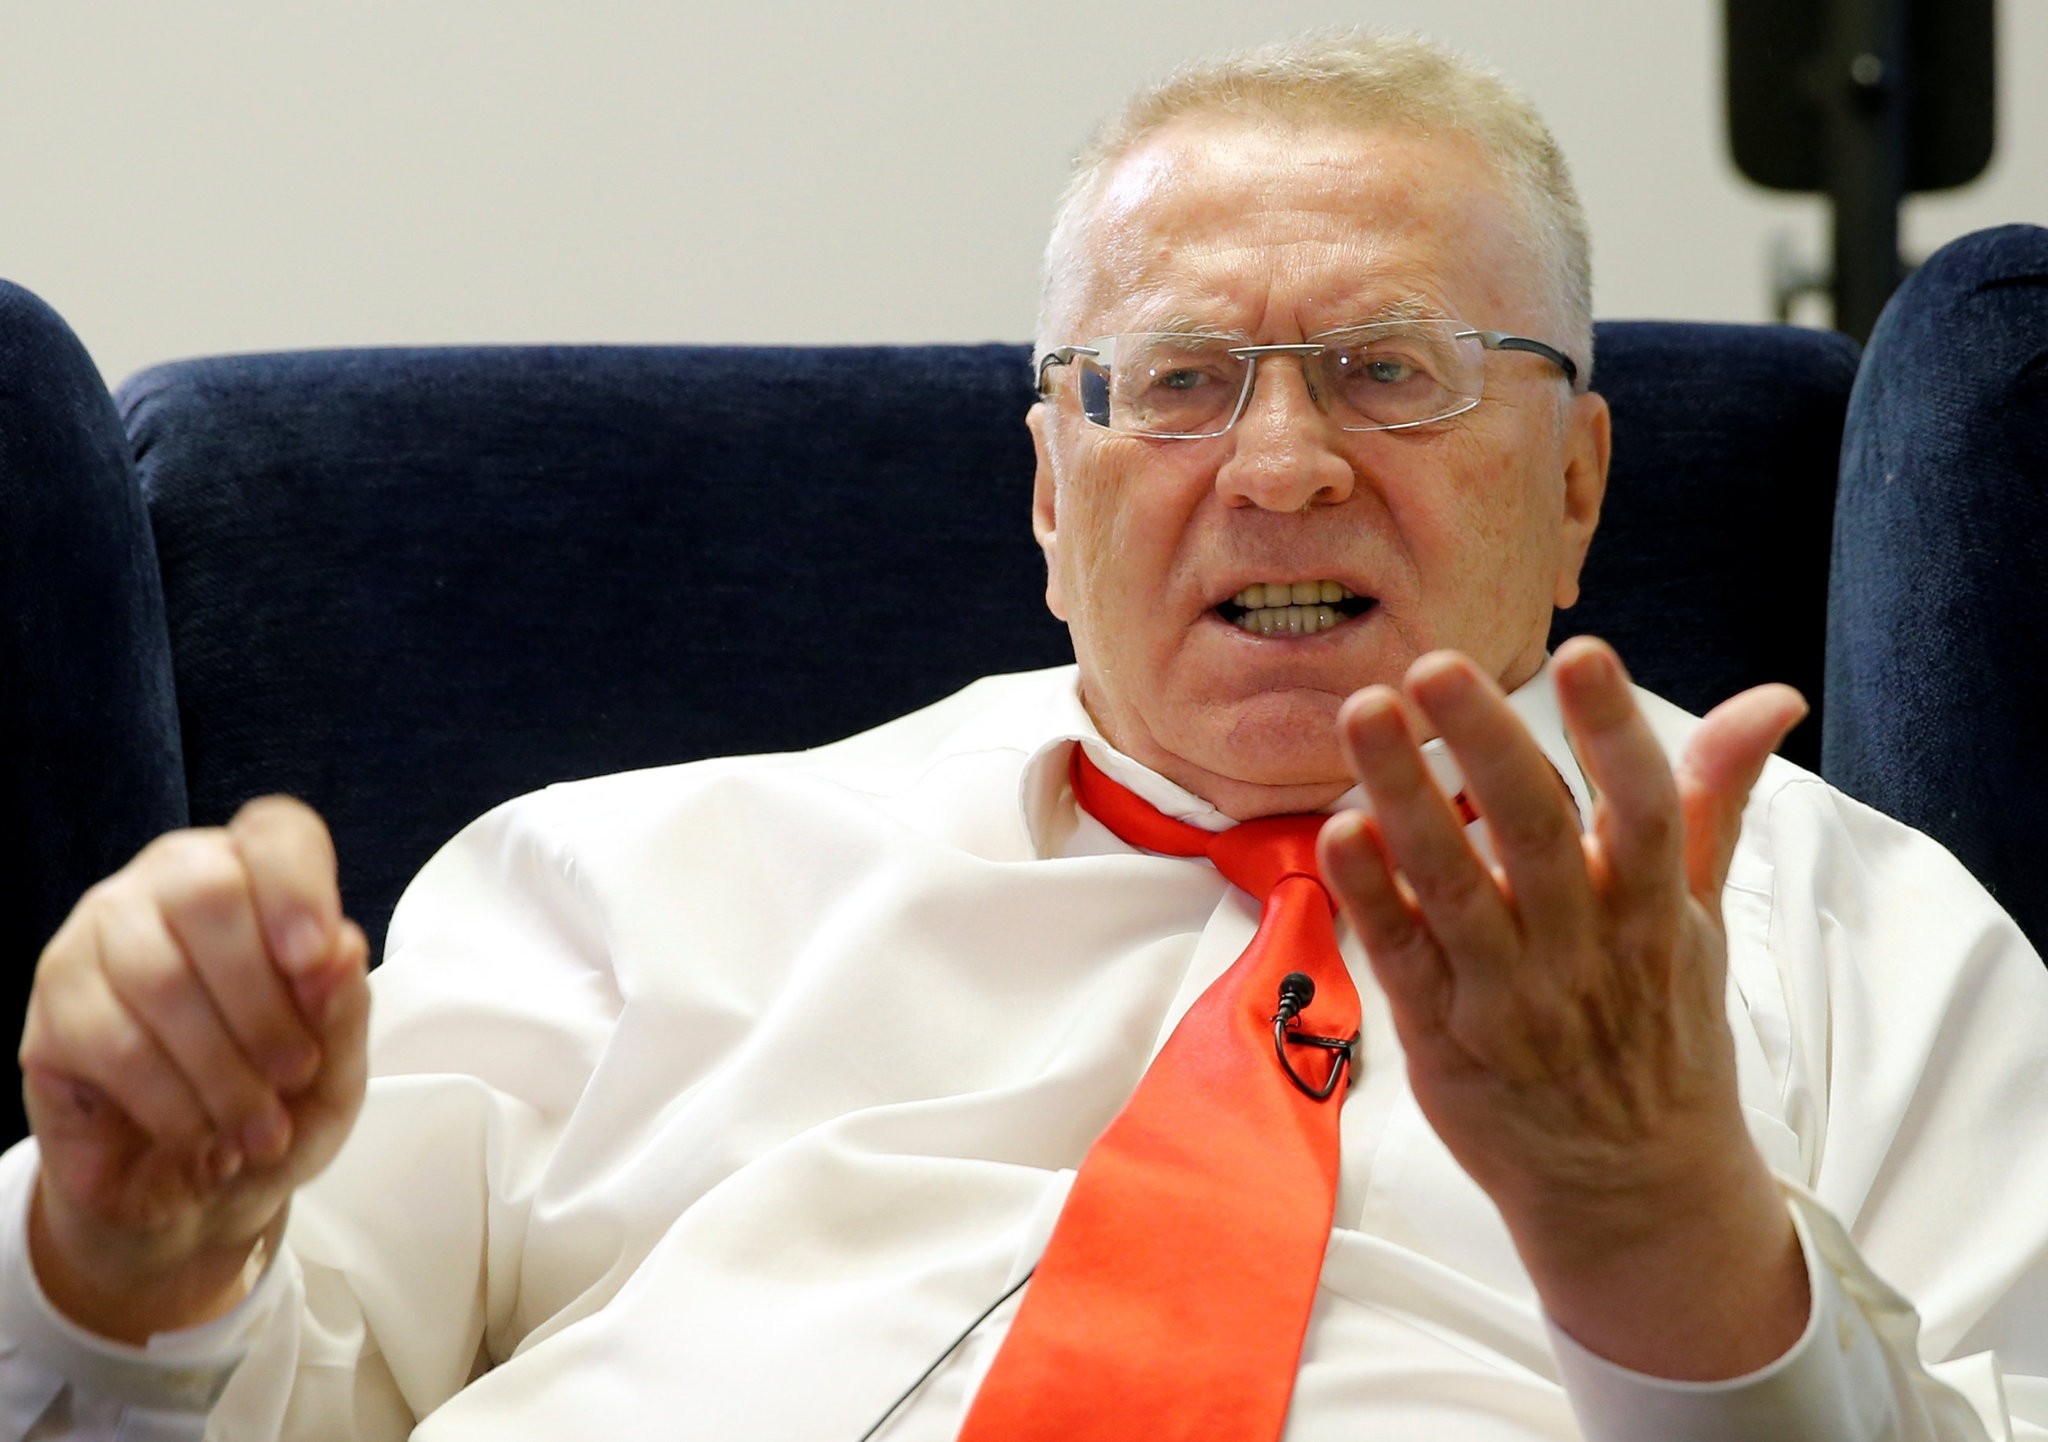 Vladimir Zhirinovsky, leader of the Liberal Democratic Party of Russia, speaks during an interview with Reuters in Moscow, Russia, October 11, 2016. (REUTERS Photo)